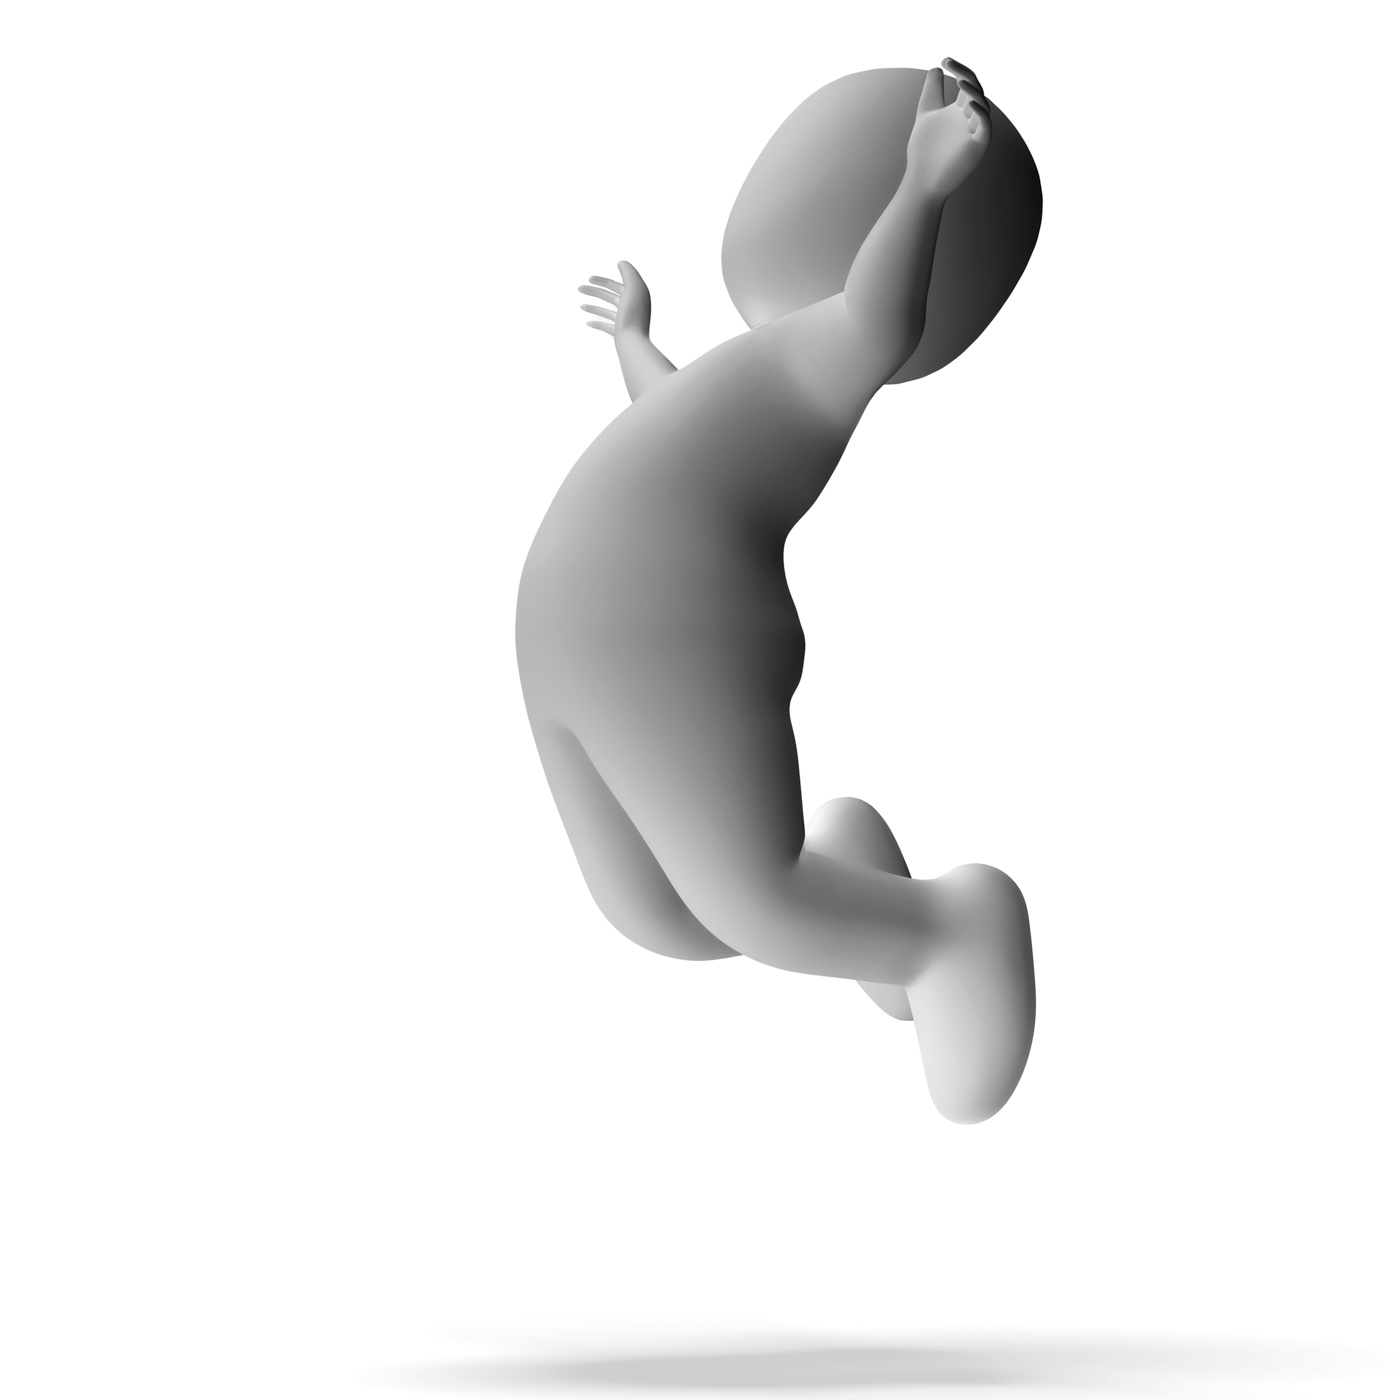 Jumping 3d Character Shows Excitement And Joy, 3d, Win, Triumph, Success, HQ Photo